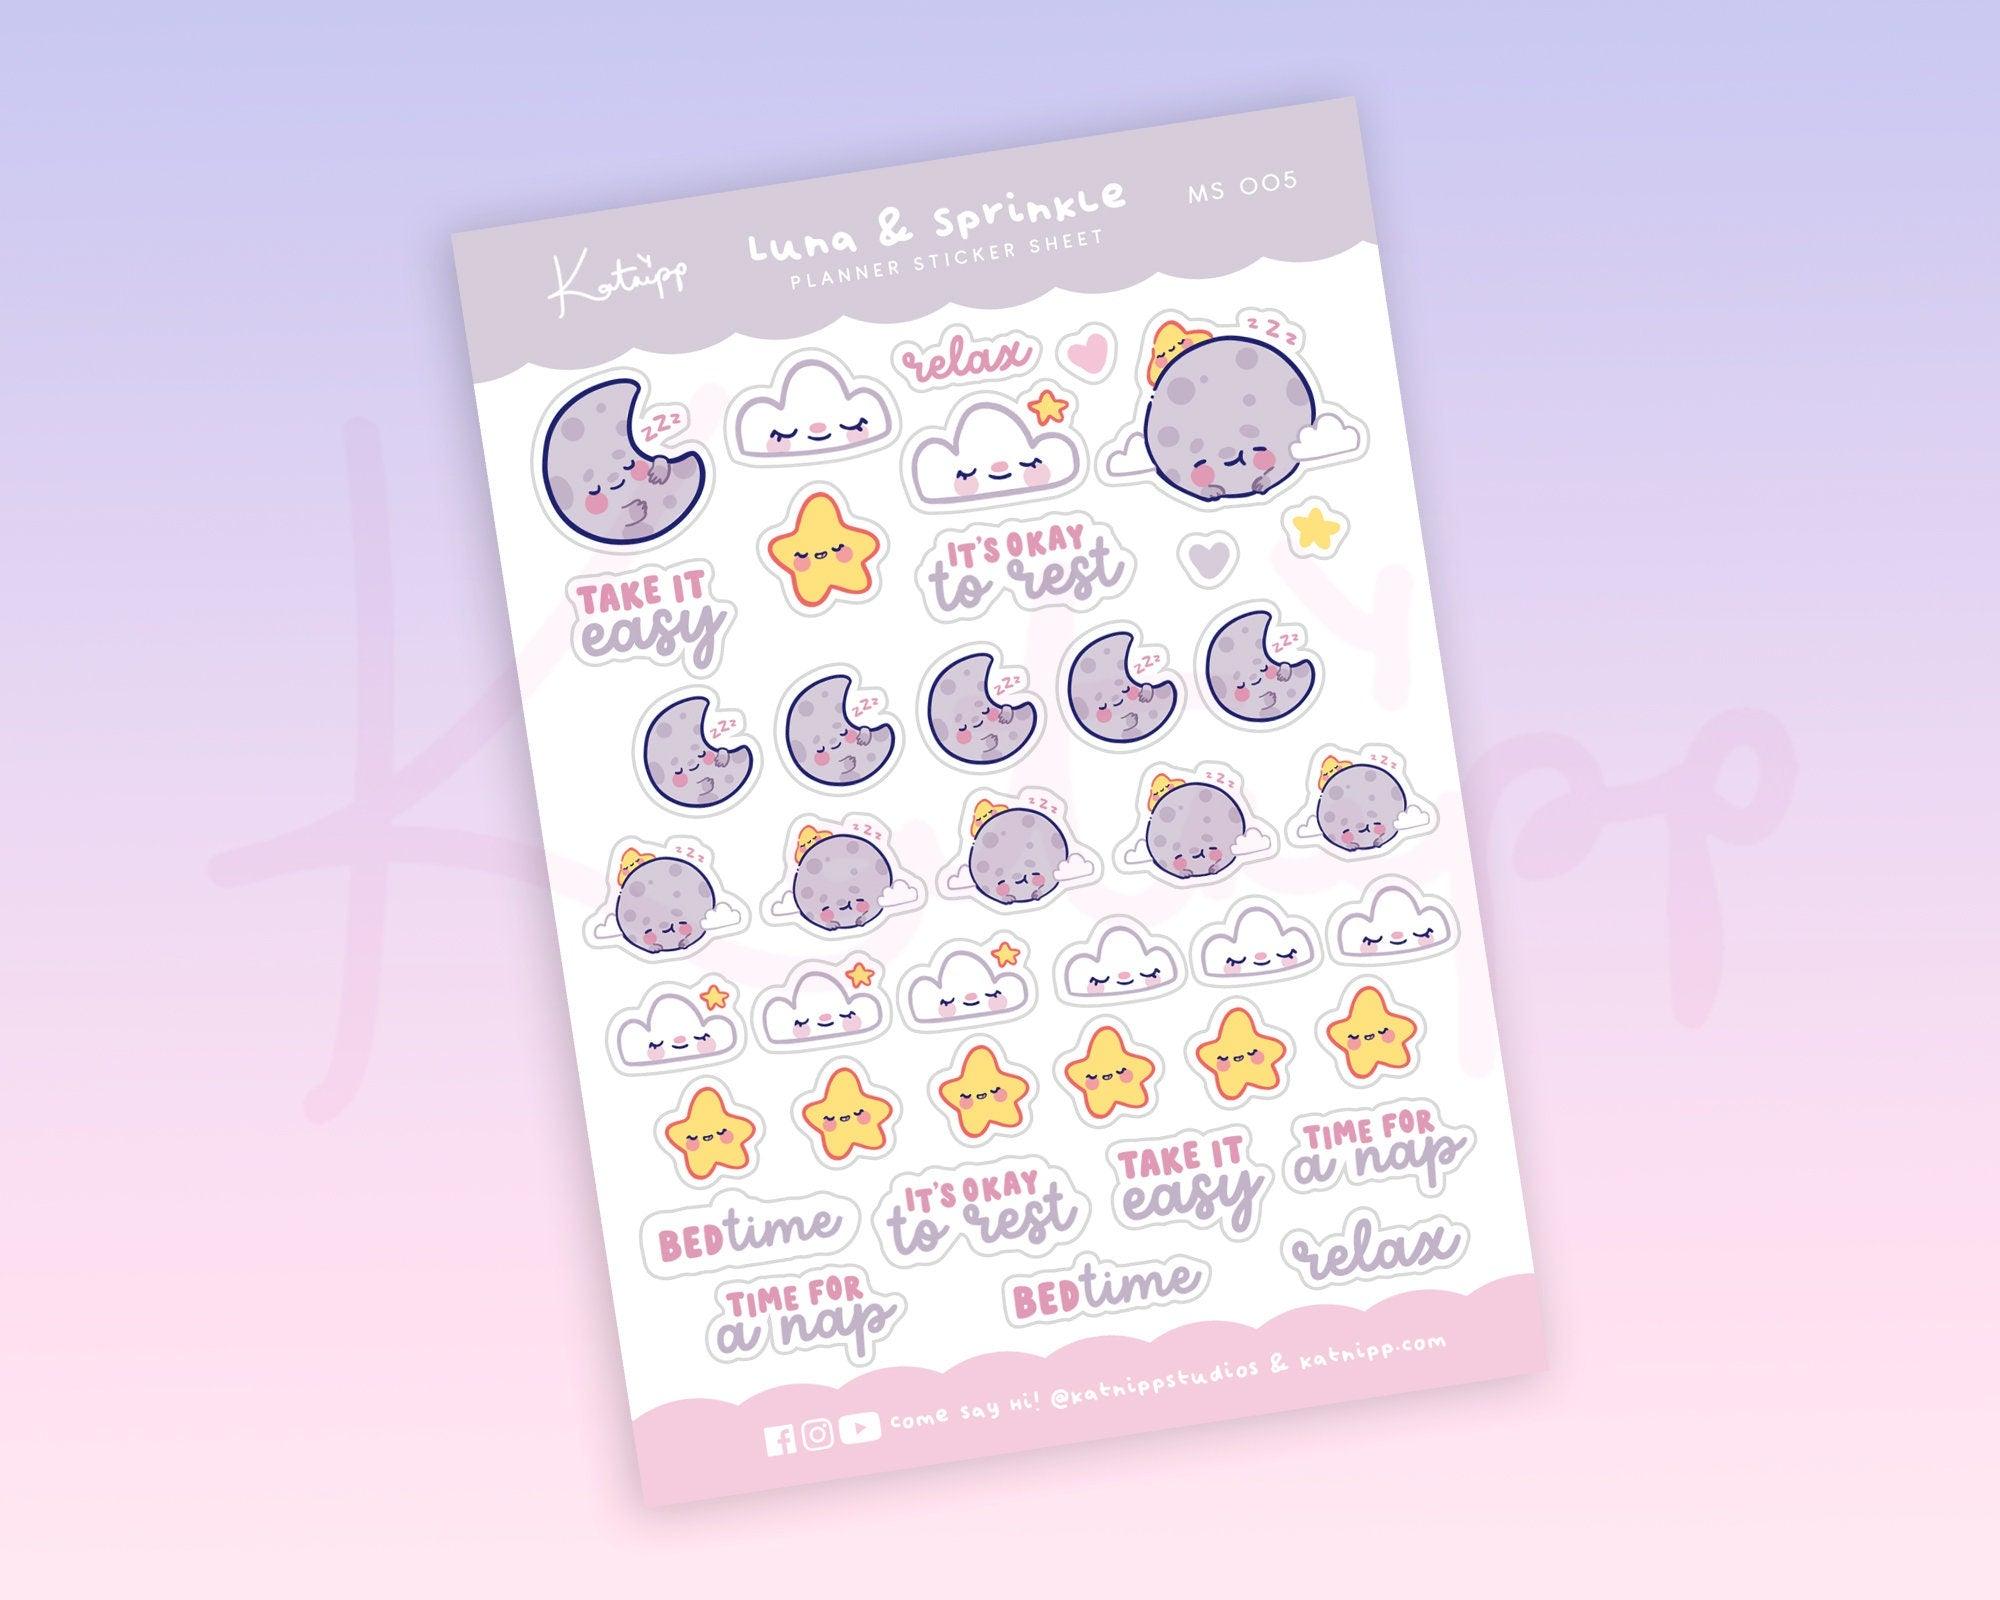 Bedtime/Naptime Planner Stickers ~ Moon and Stars MS005 - Katnipp Illustrations